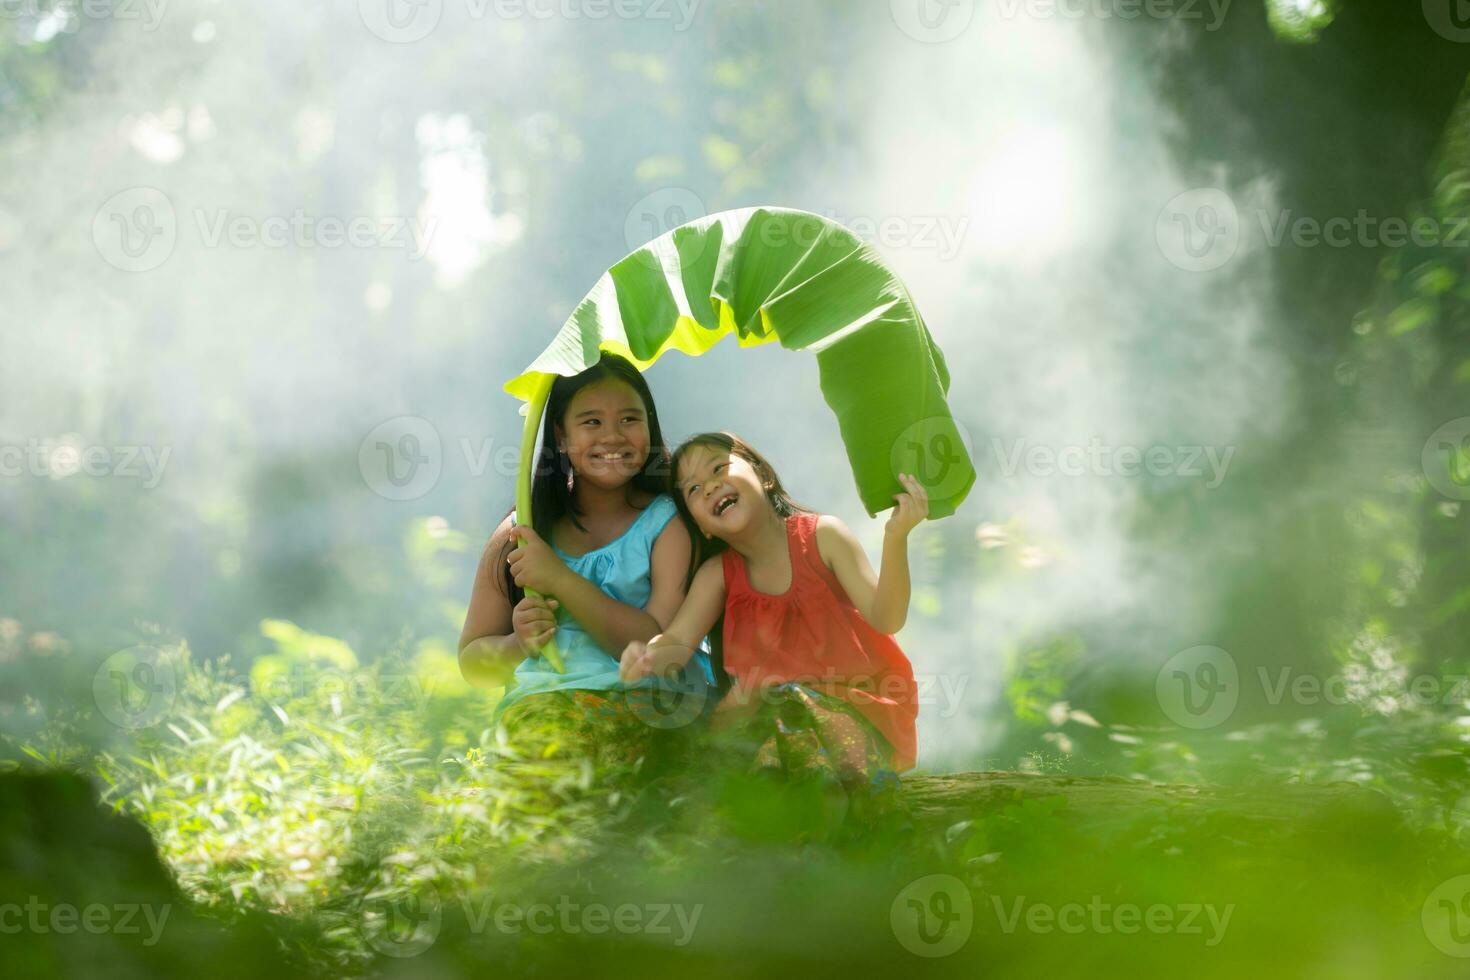 Two girls Asian women with traditional clothing stand had fun playing together in the rainforest. photo